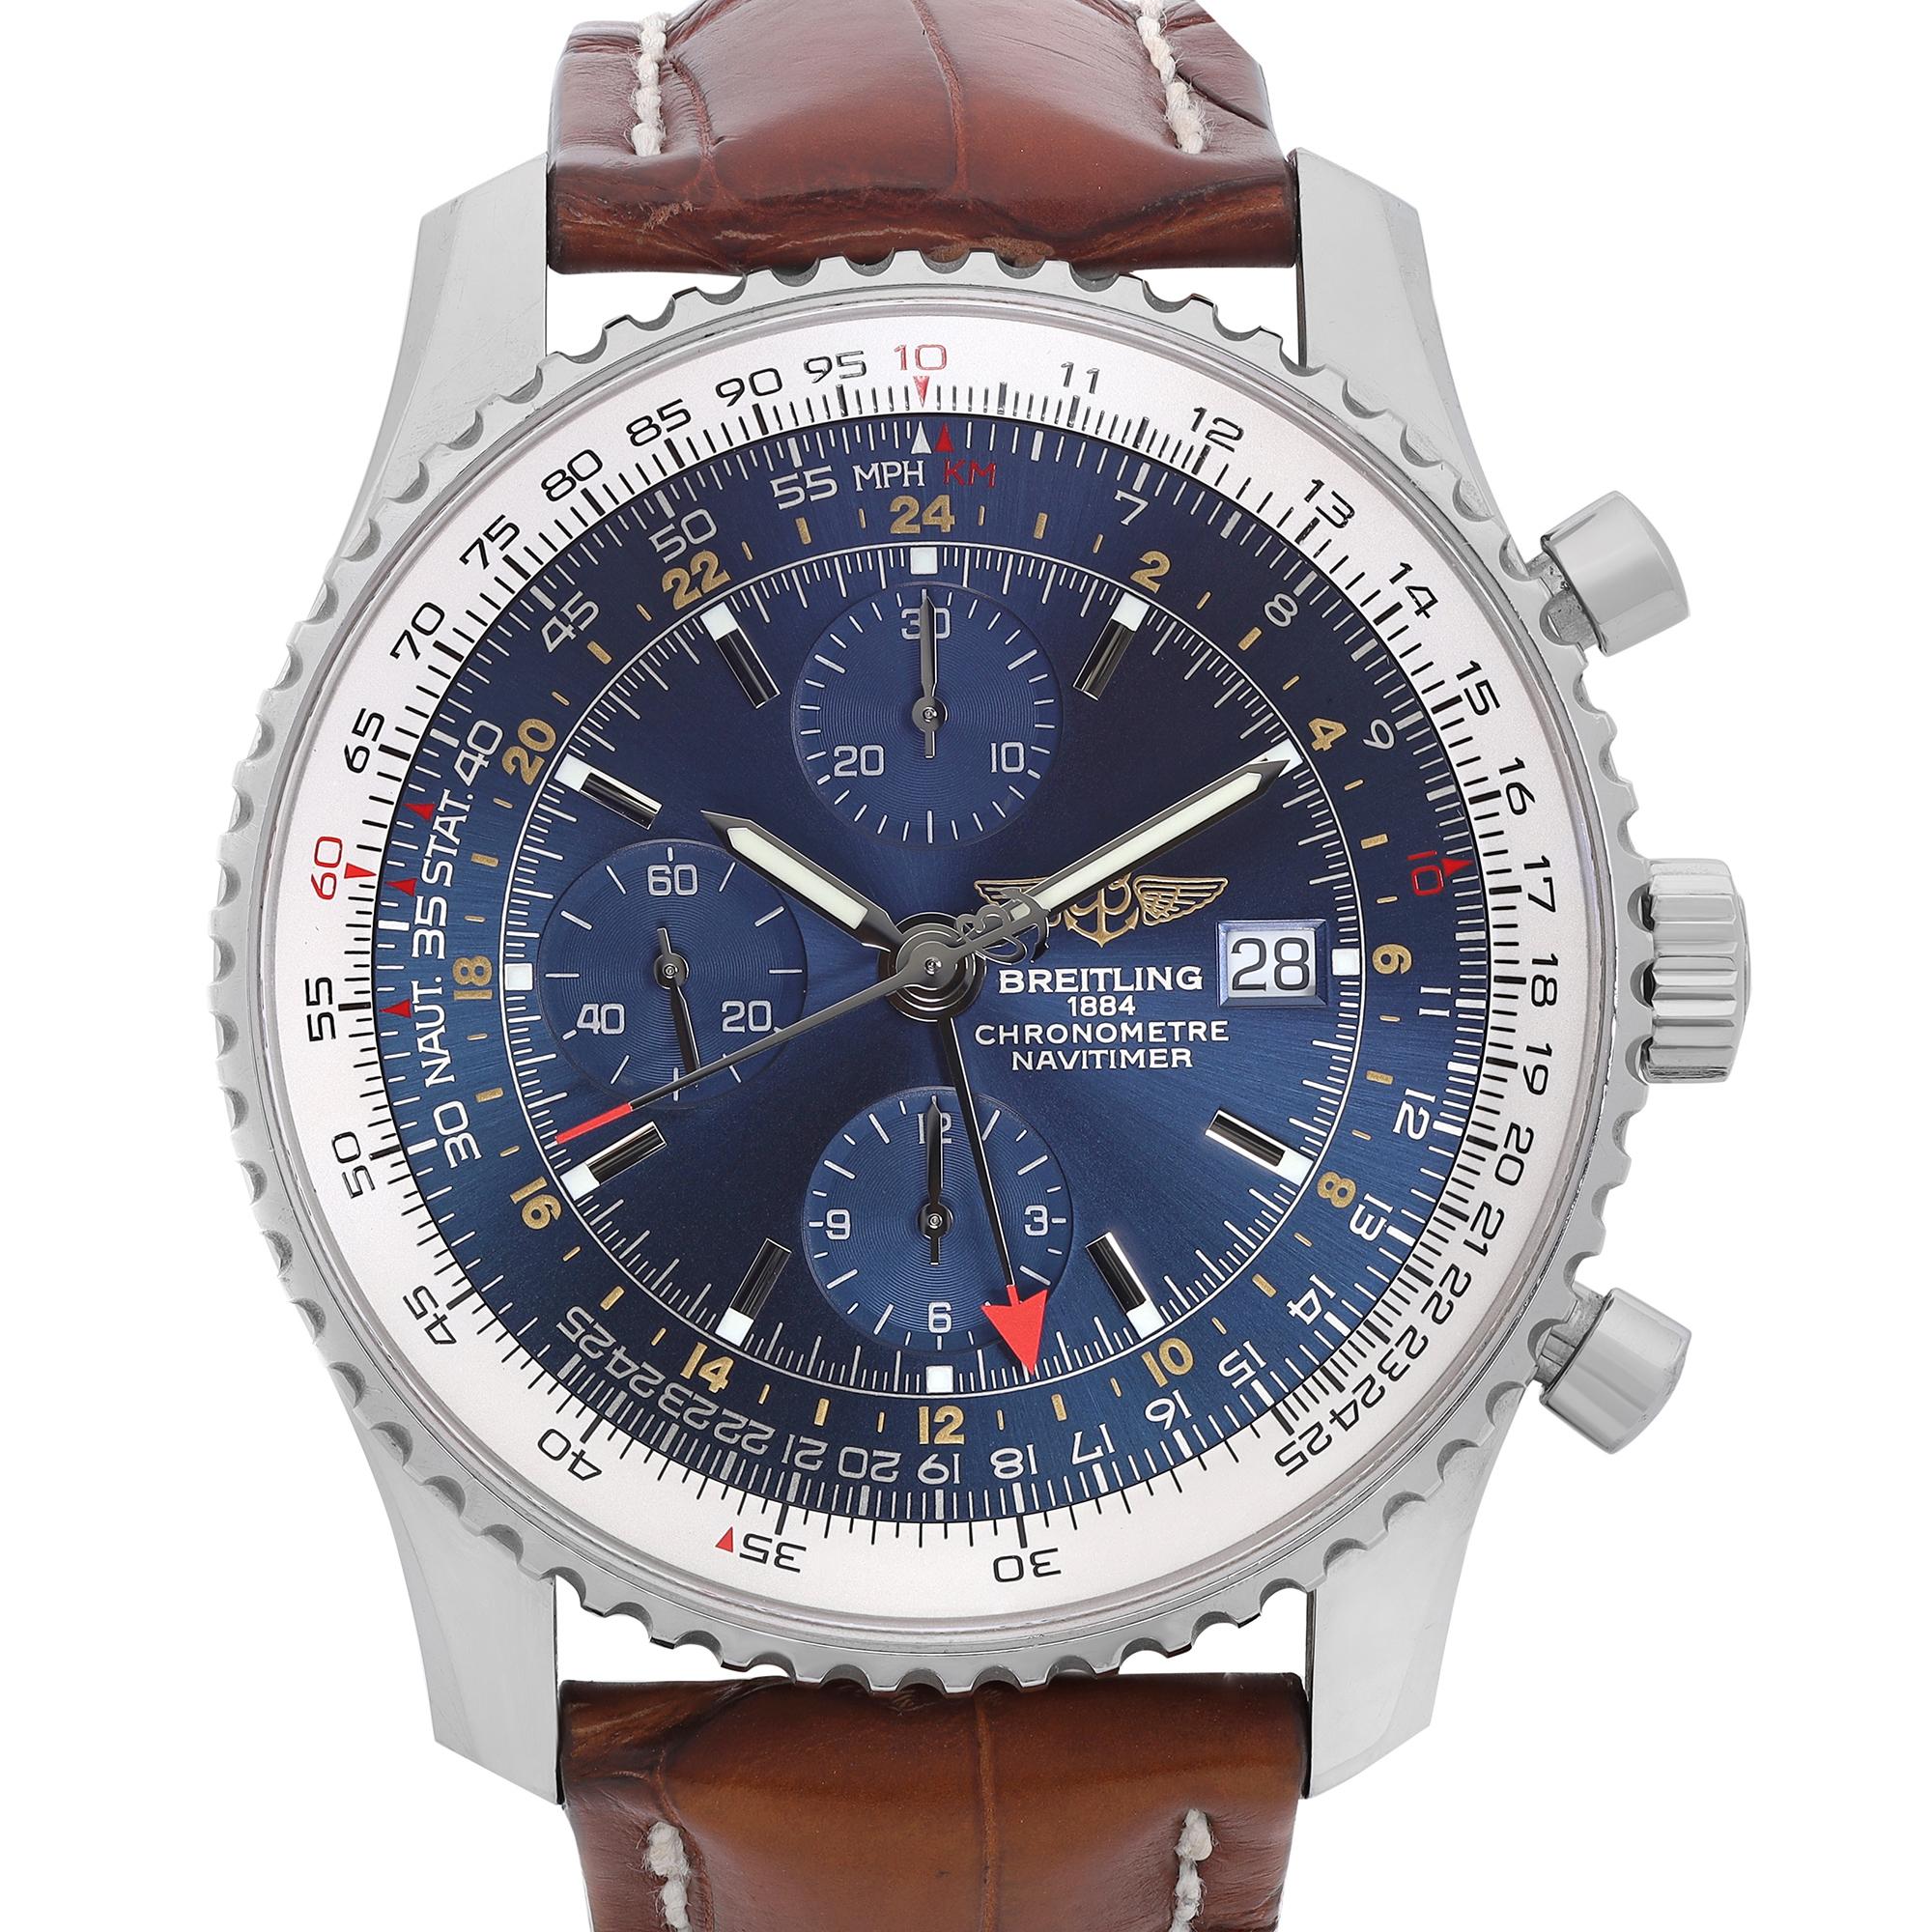 The leather strap shows wear but no rips or cracks. Recently serviced and polished.

Brand: Breitling  Type: Wristwatch  Department: Men  Model Number: A24322  Country/Region of Manufacture: Switzerland  Style: Luxury  Model: Breitling Navitimer 